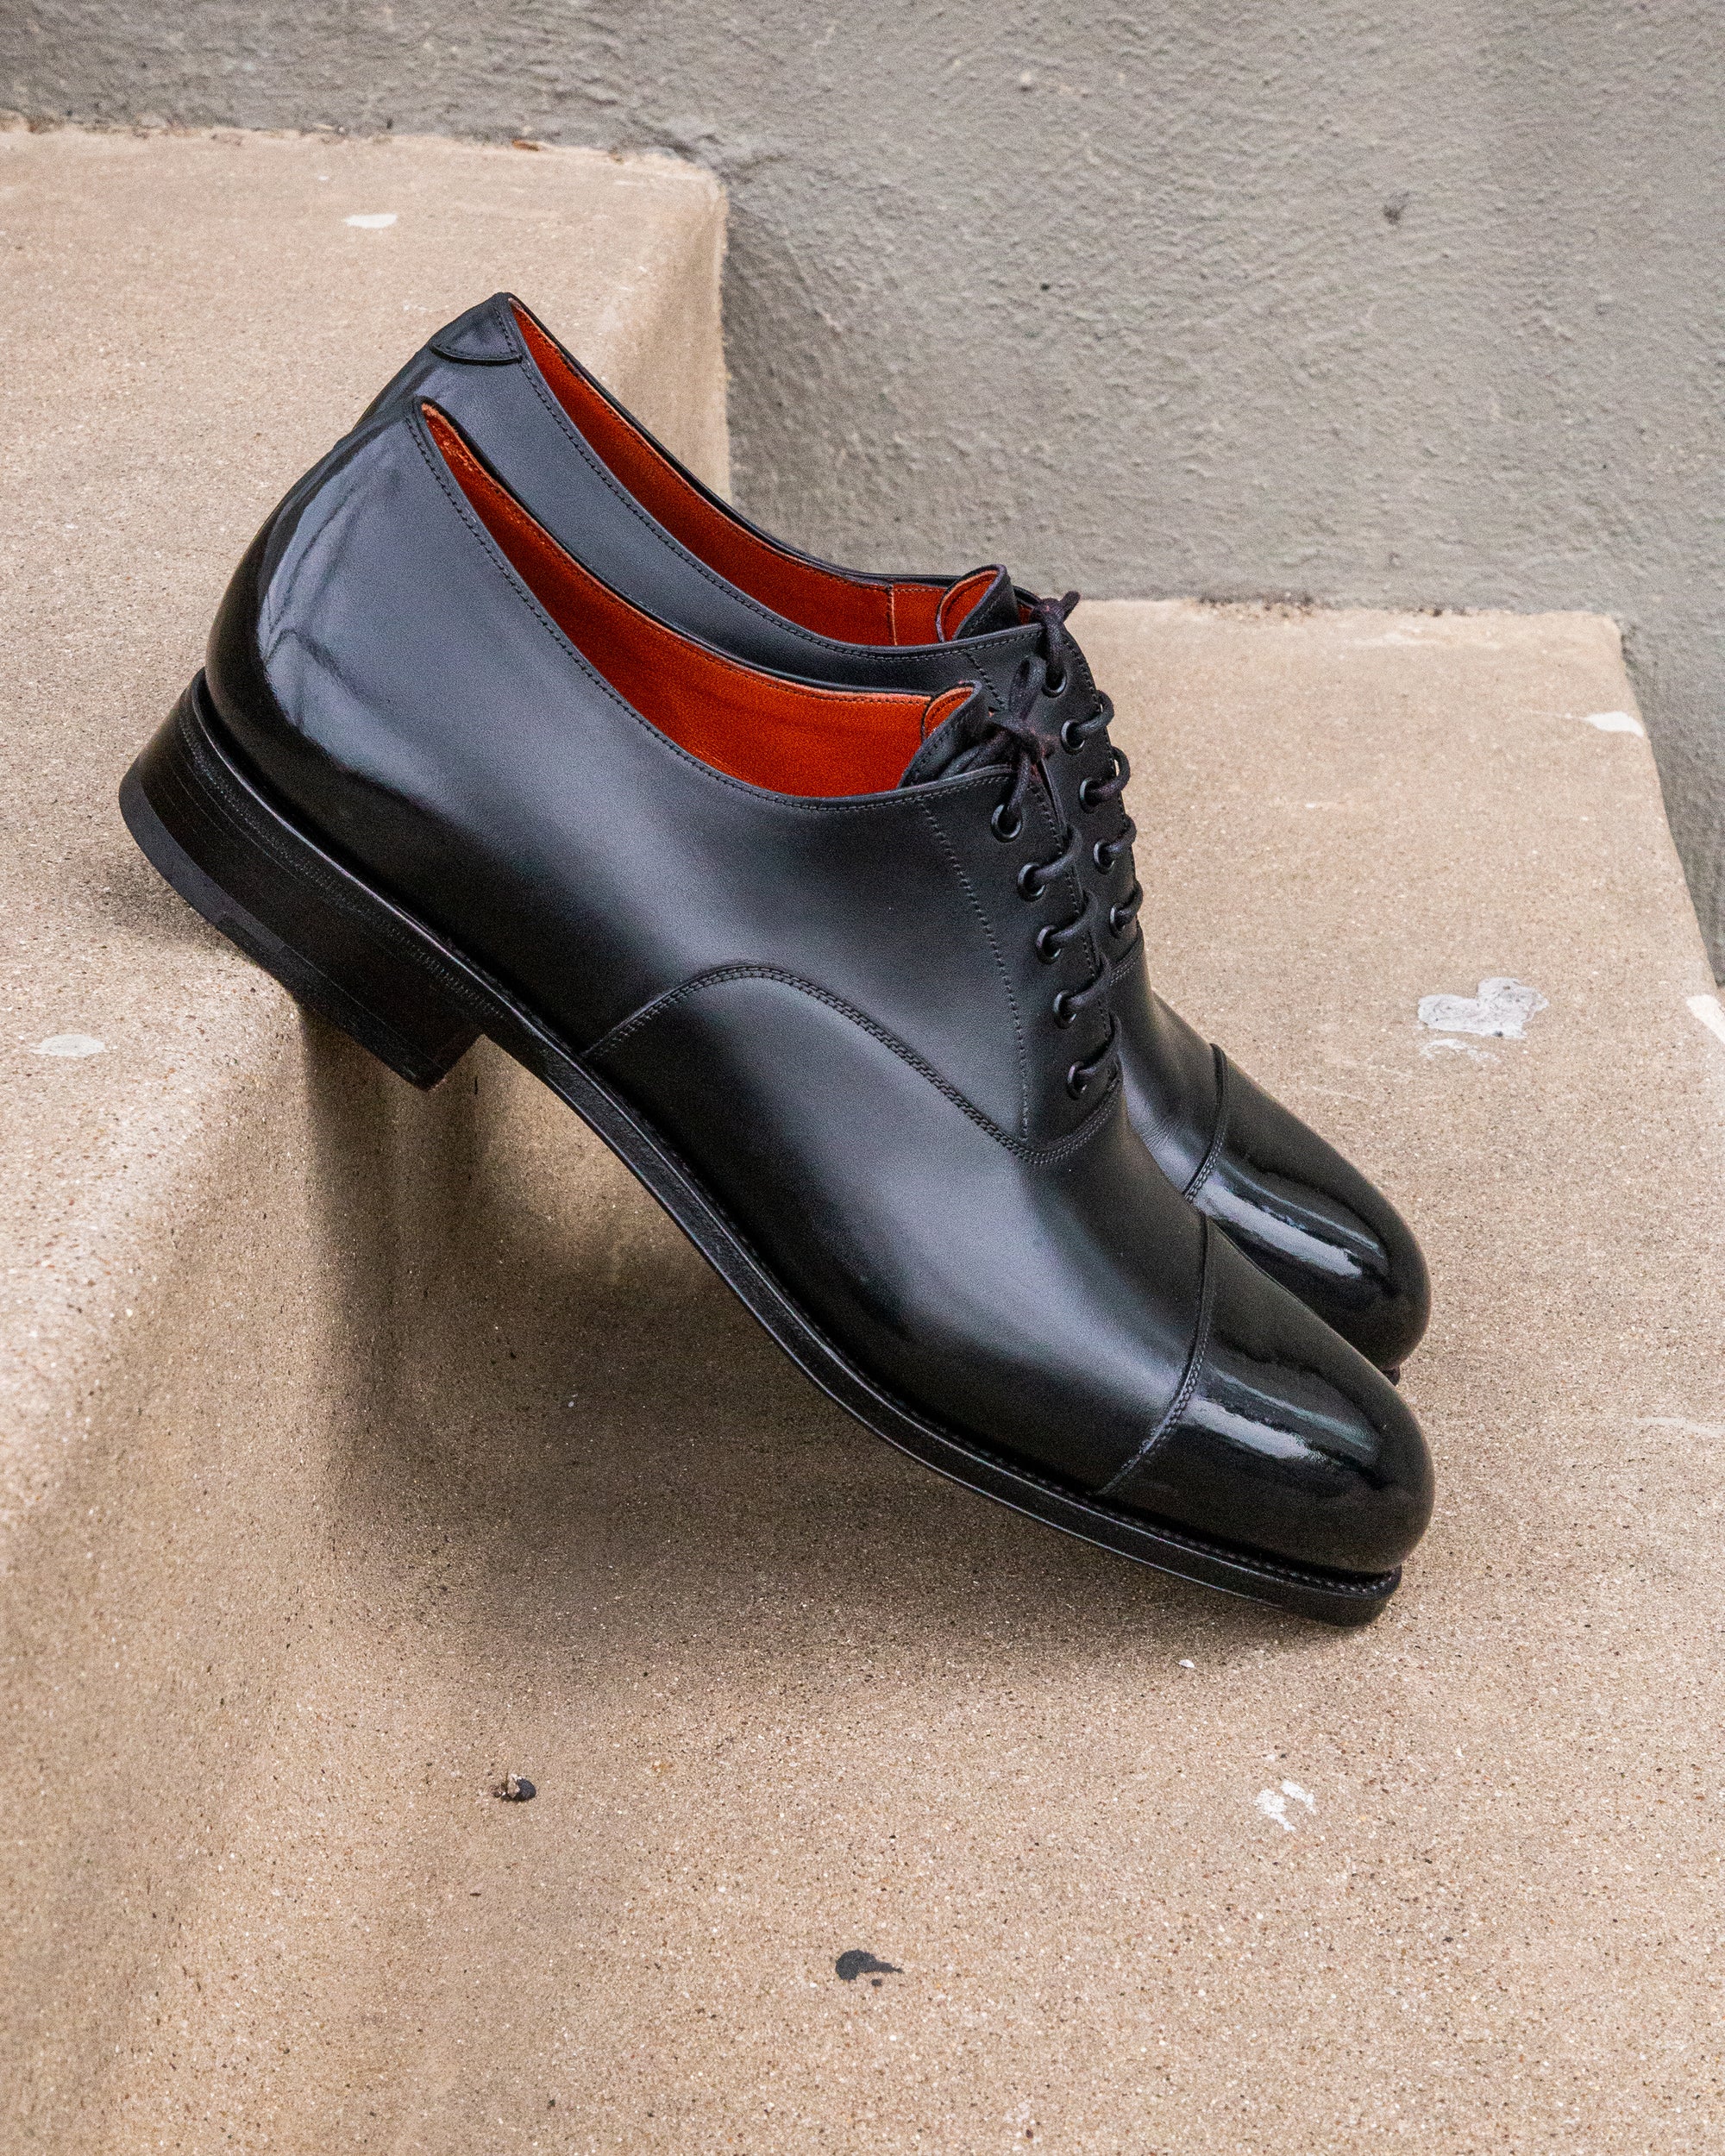 A pair of black oxford shoes with a High Shine Service, sitting on steps from KirbyAllison.com.